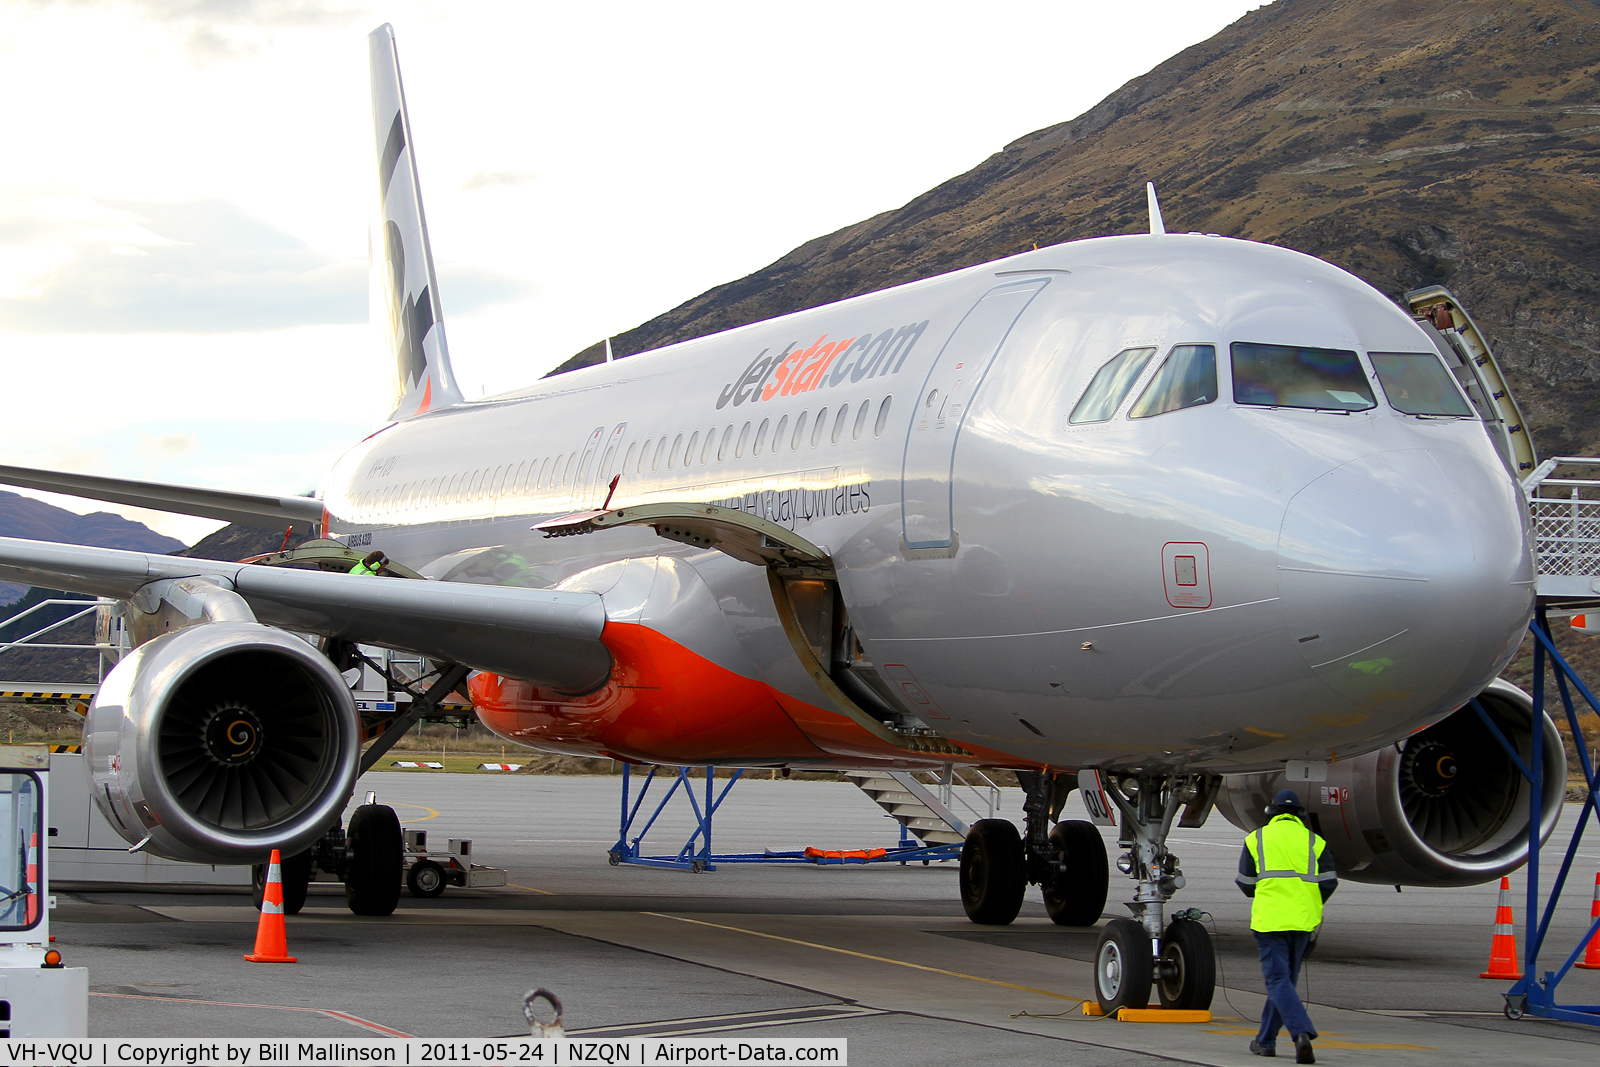 VH-VQU, 2005 Airbus A320-232 C/N 2455, after my arrival